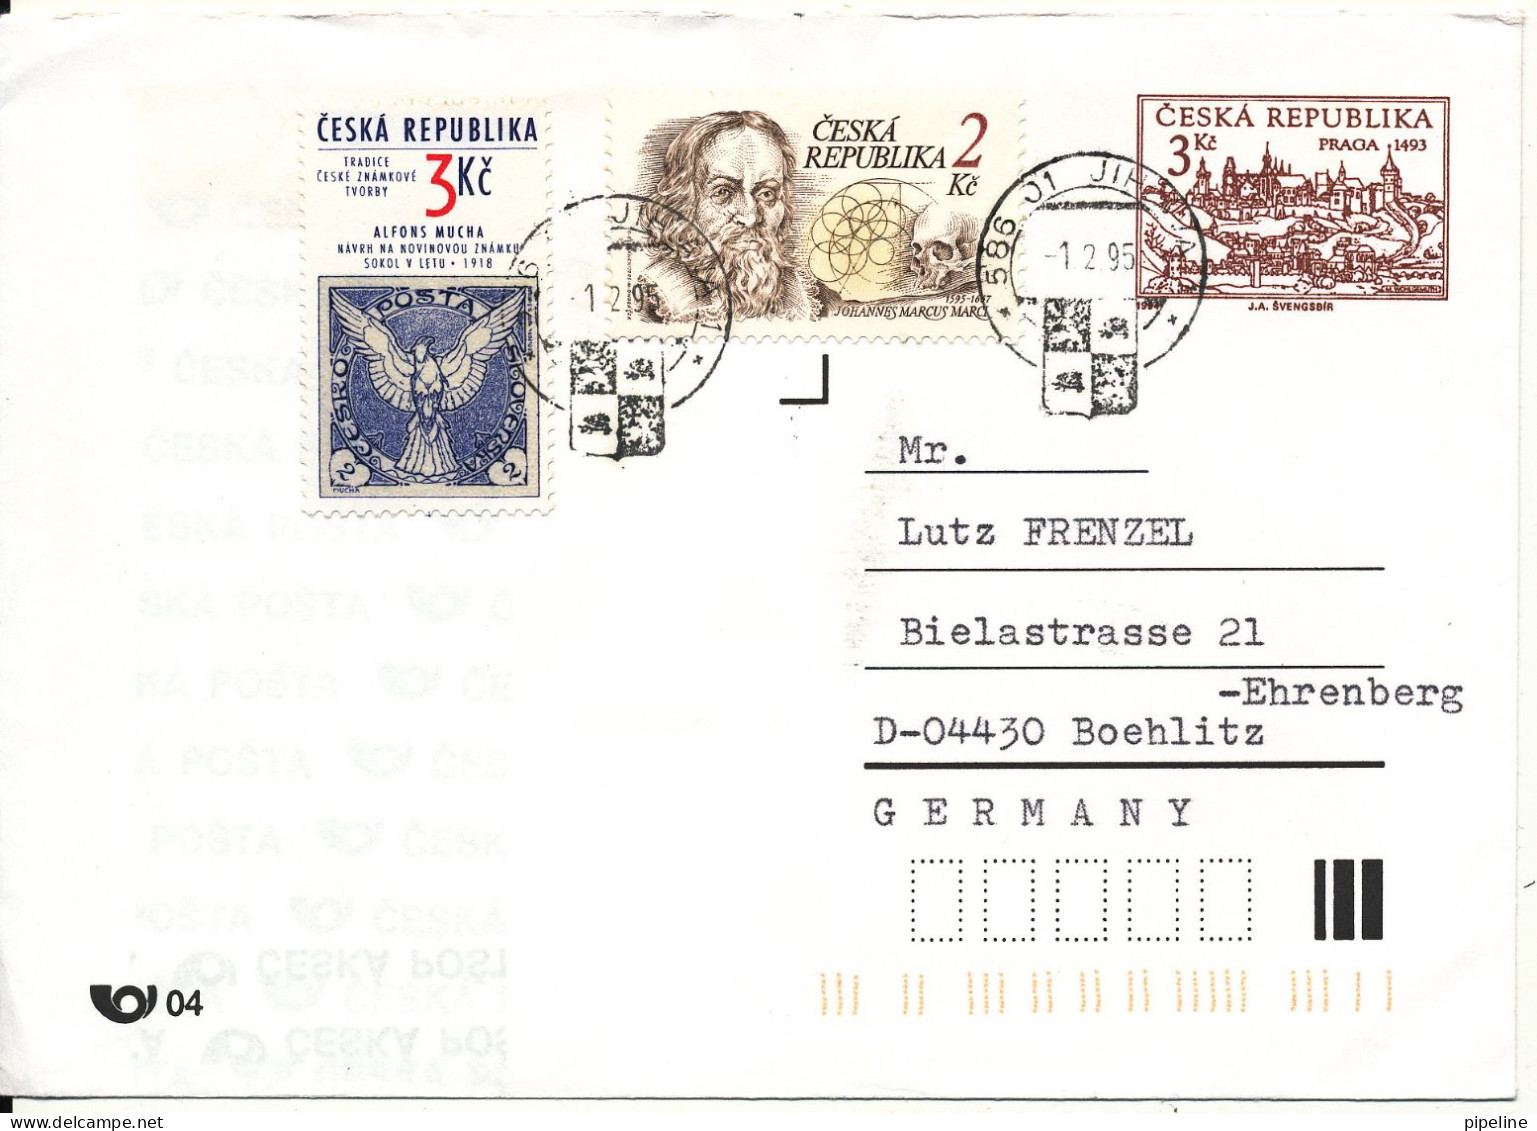 Czech Republic Uprated Postal Stationery Cover Sent To Germany 1-2-1995 - Sobres